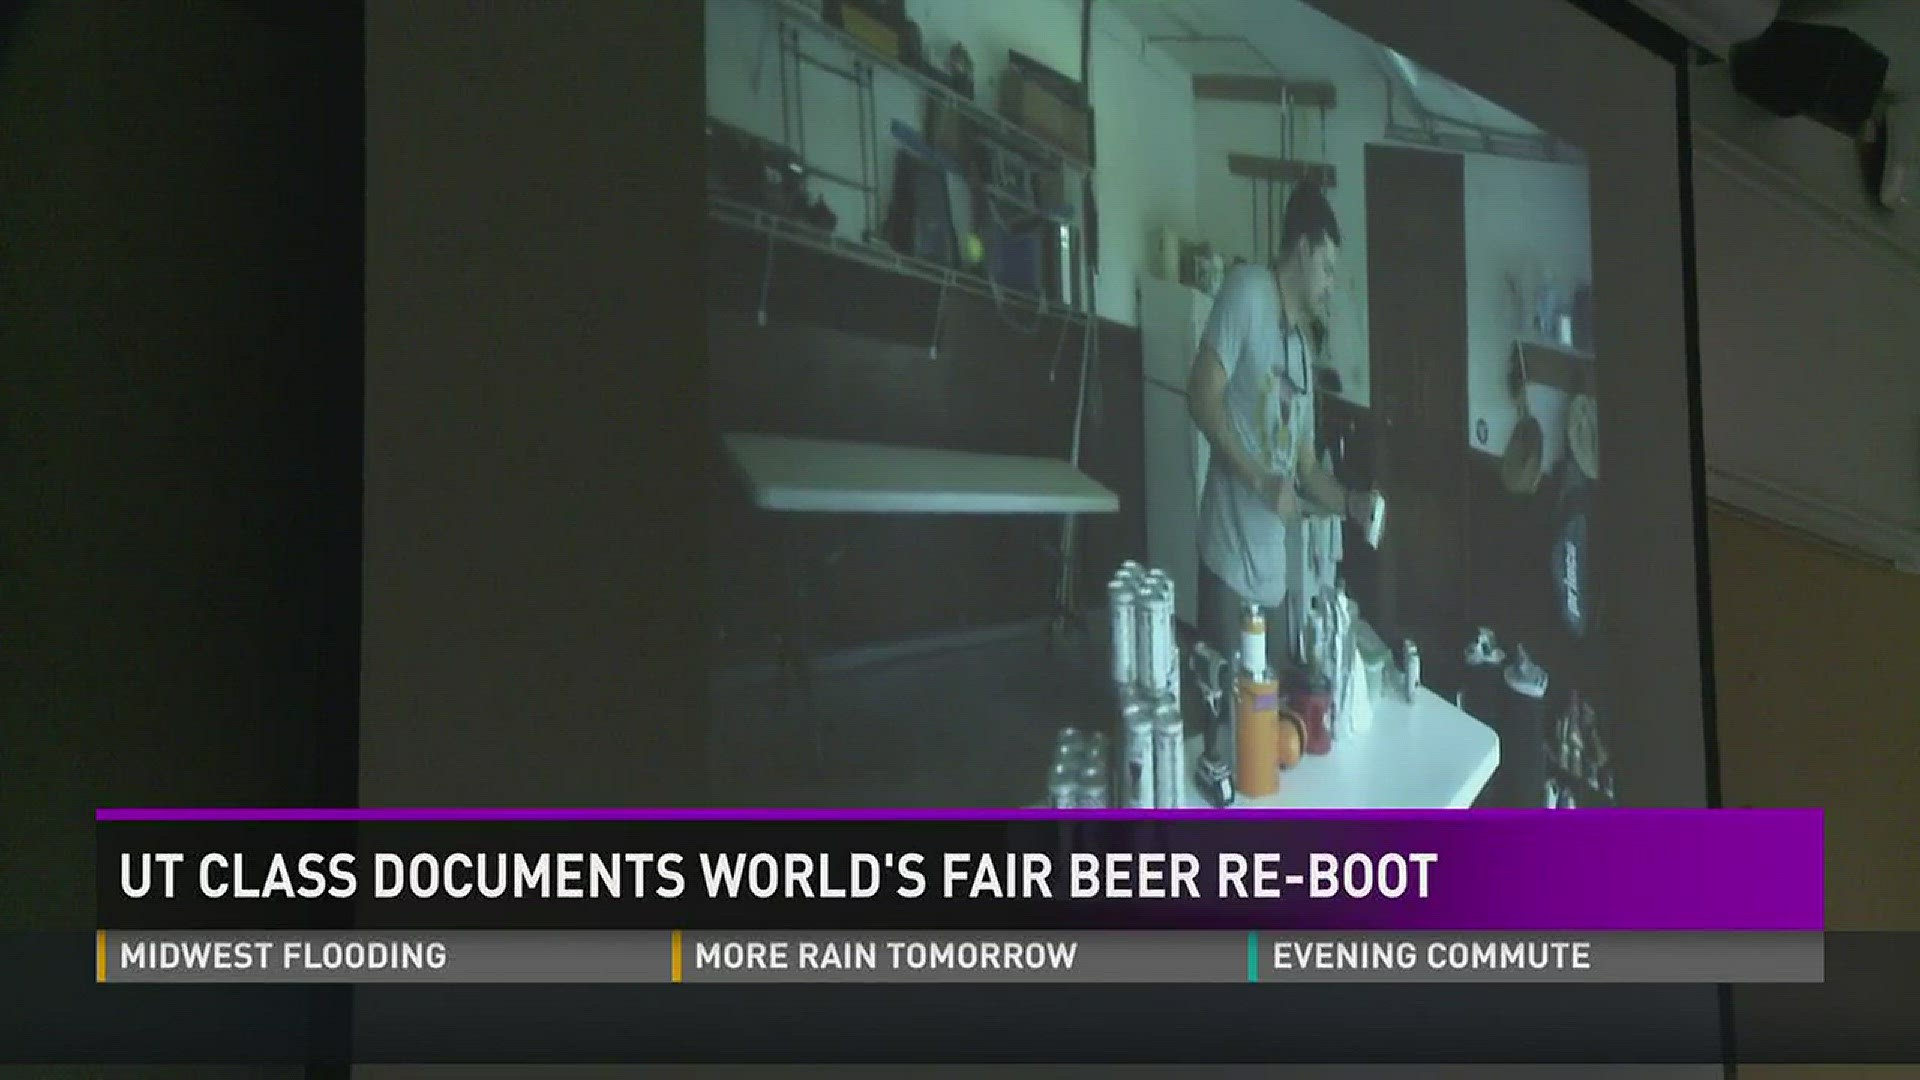 April 20, 2017: A UT class is documenting the return of World's Fair beer 35 years after the World's Fair came to Knoxville.